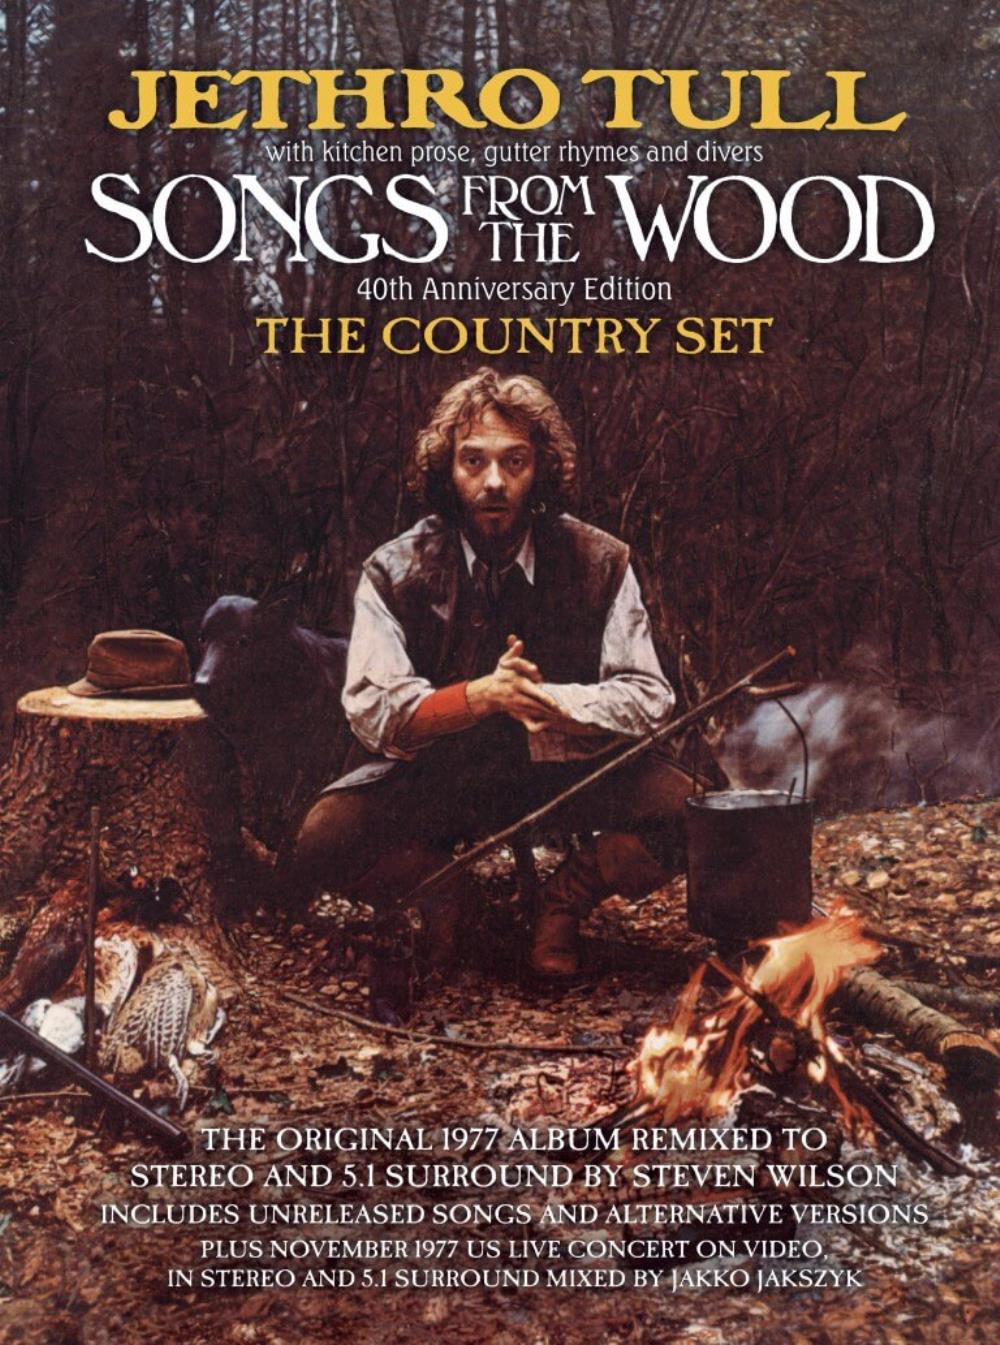 Jethro Tull - Songs From The Wood - 40th Anniversary Edition - The Country Set CD (album) cover